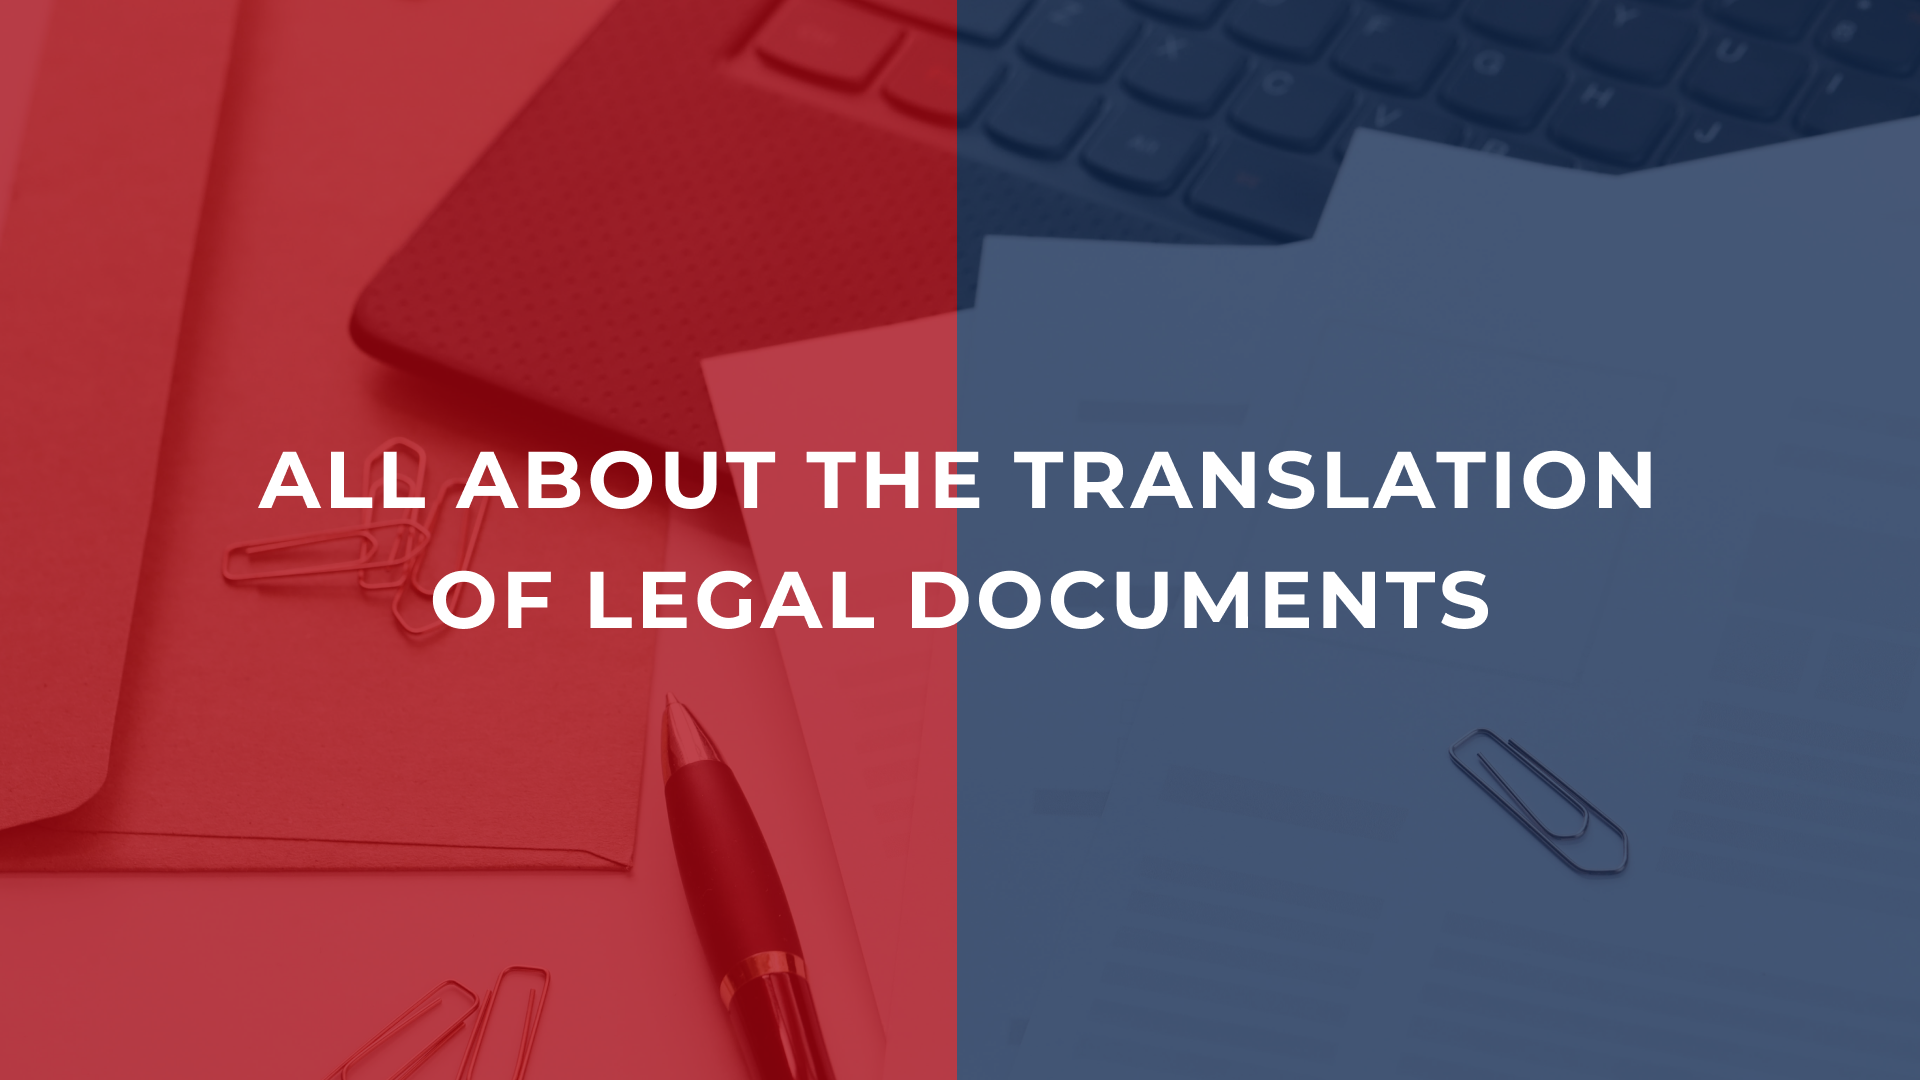 All about translation of legal documents